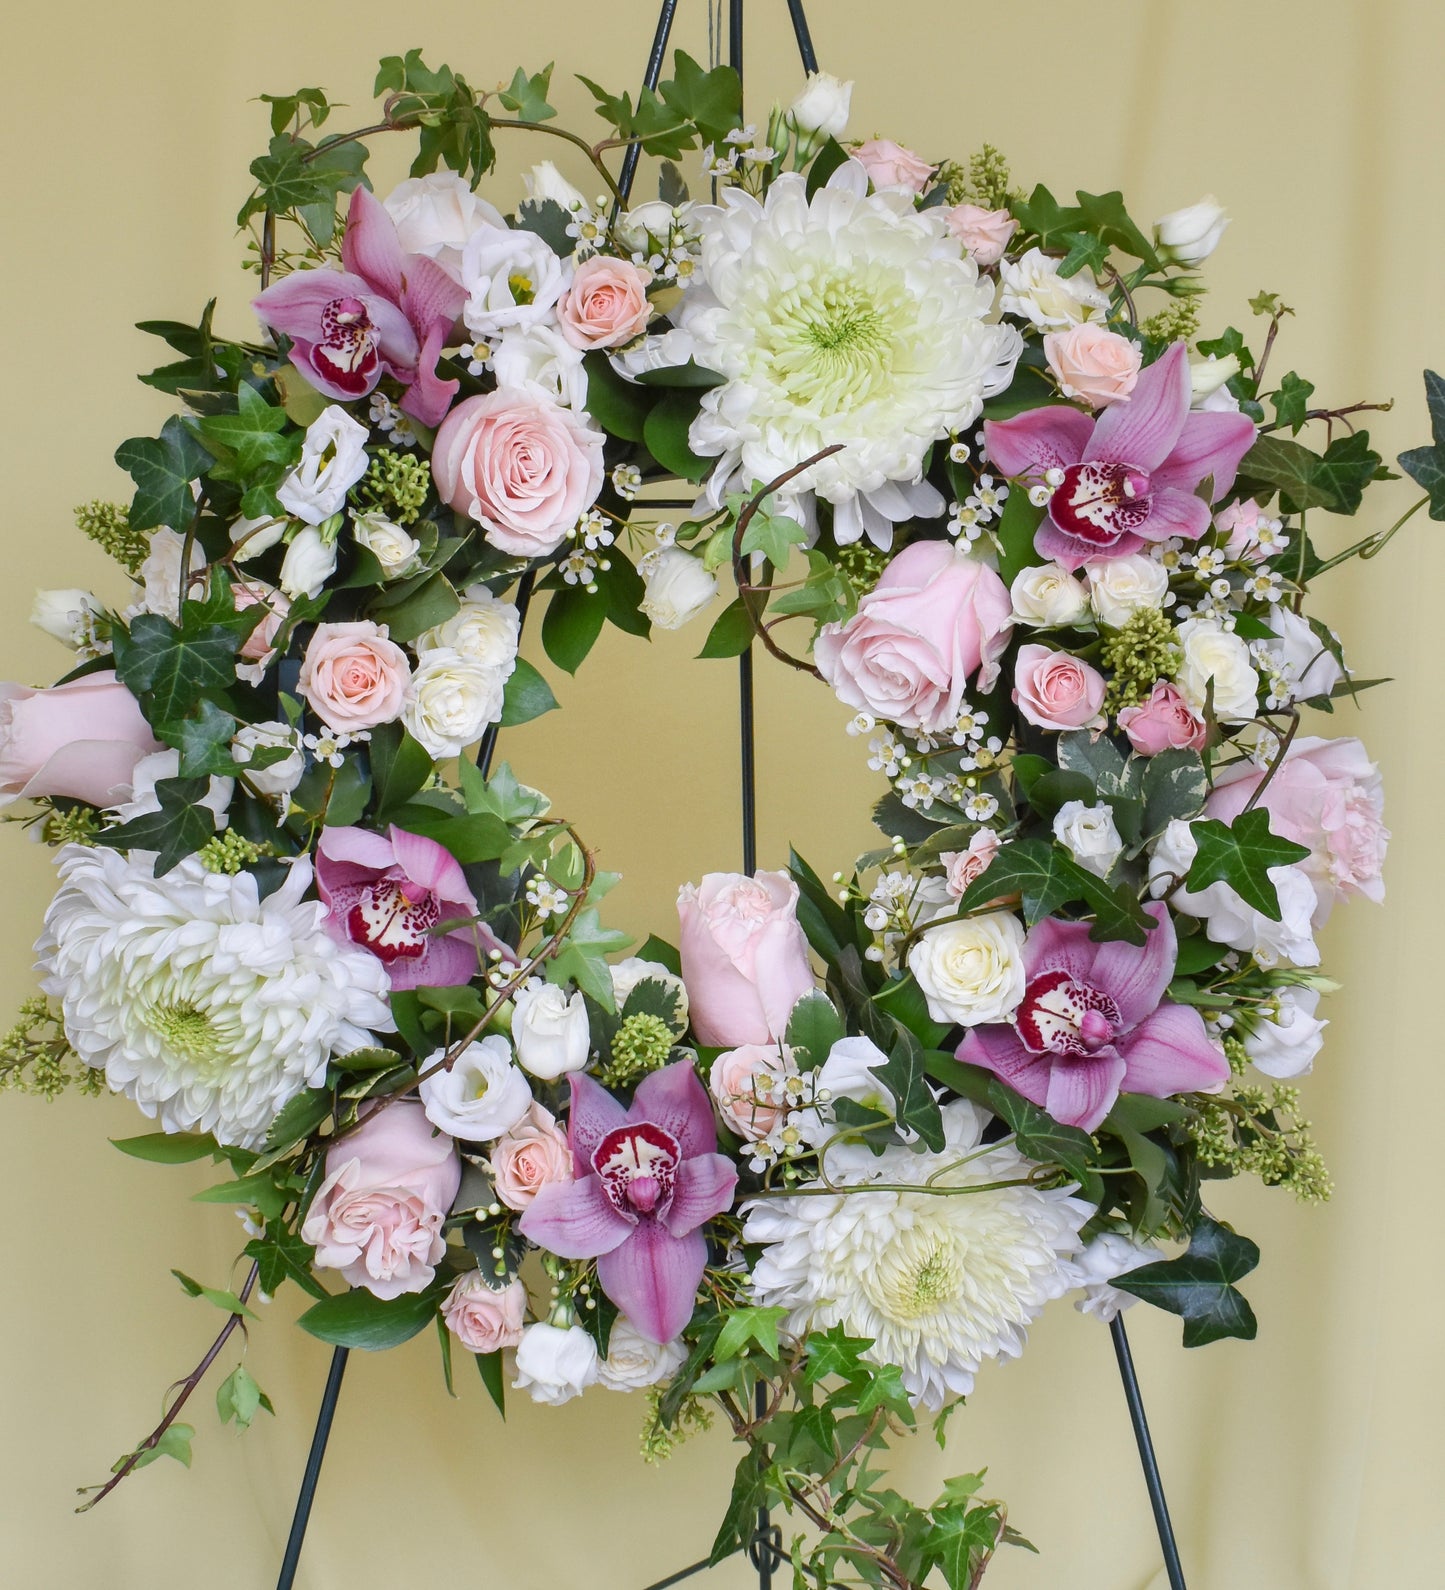 Sympathy wreath with white and light pink flowers and greens